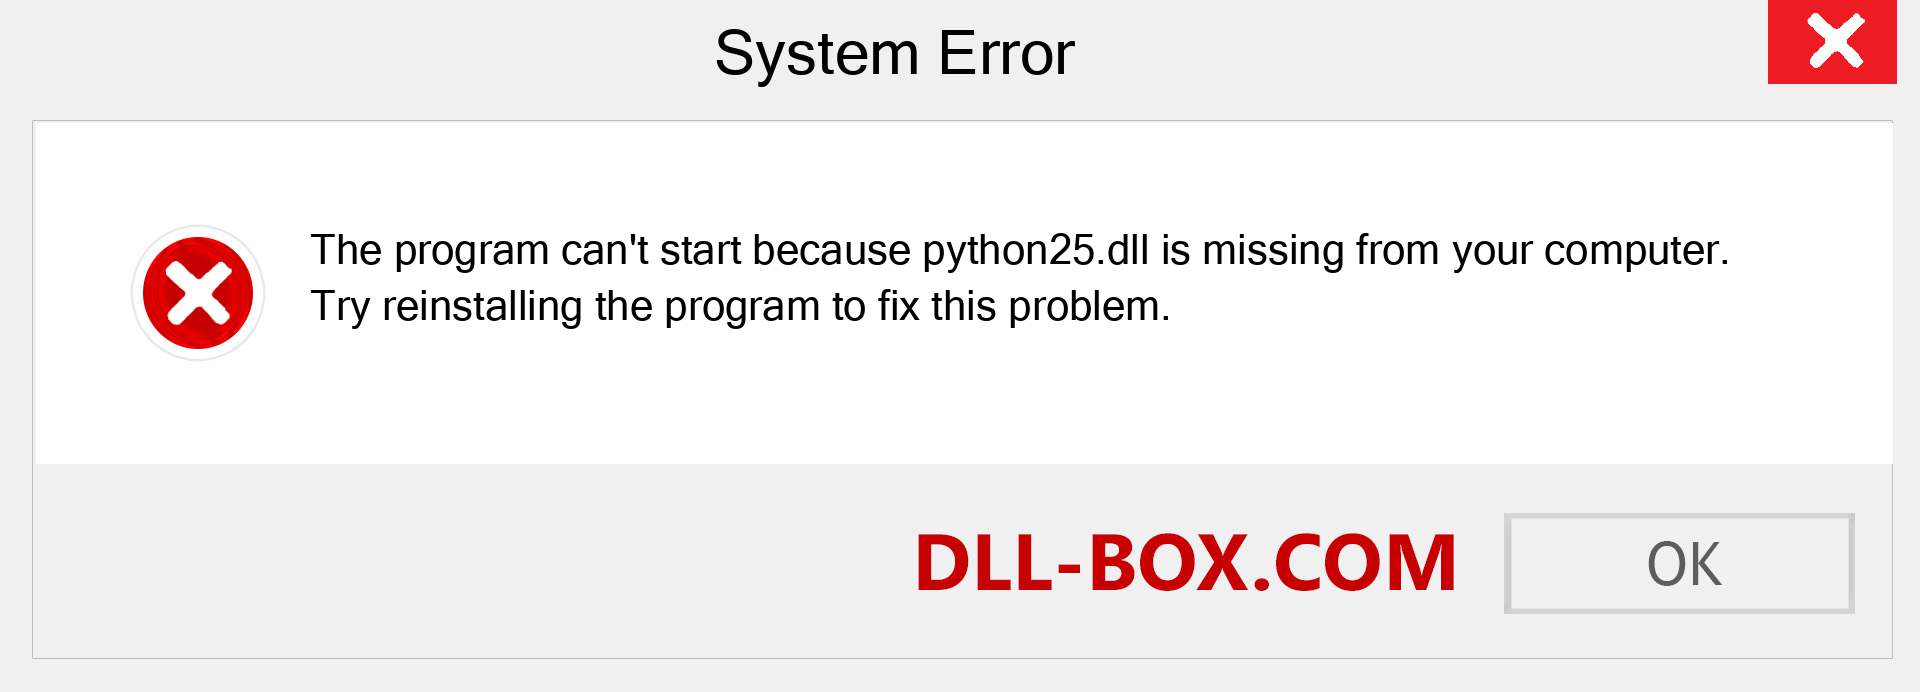  python25.dll file is missing?. Download for Windows 7, 8, 10 - Fix  python25 dll Missing Error on Windows, photos, images